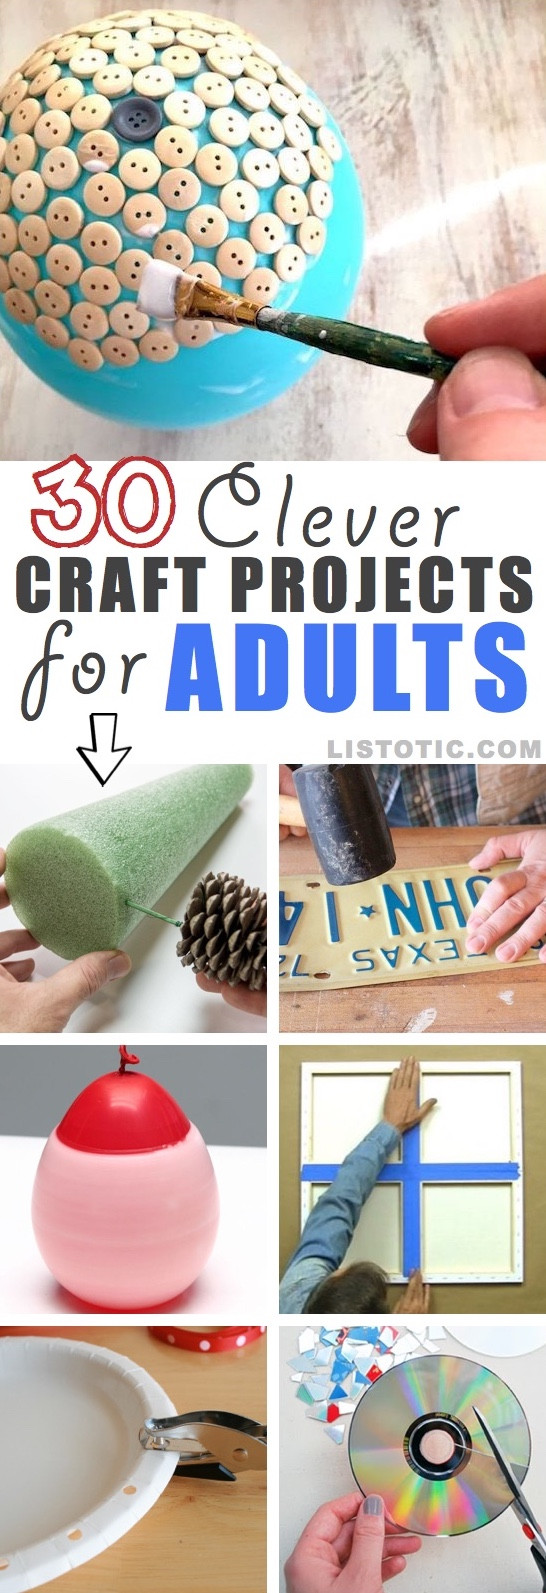 Fun Crafting Ideas For Adults
 30 Easy Craft Ideas That Will Spark Your Creativity DIY